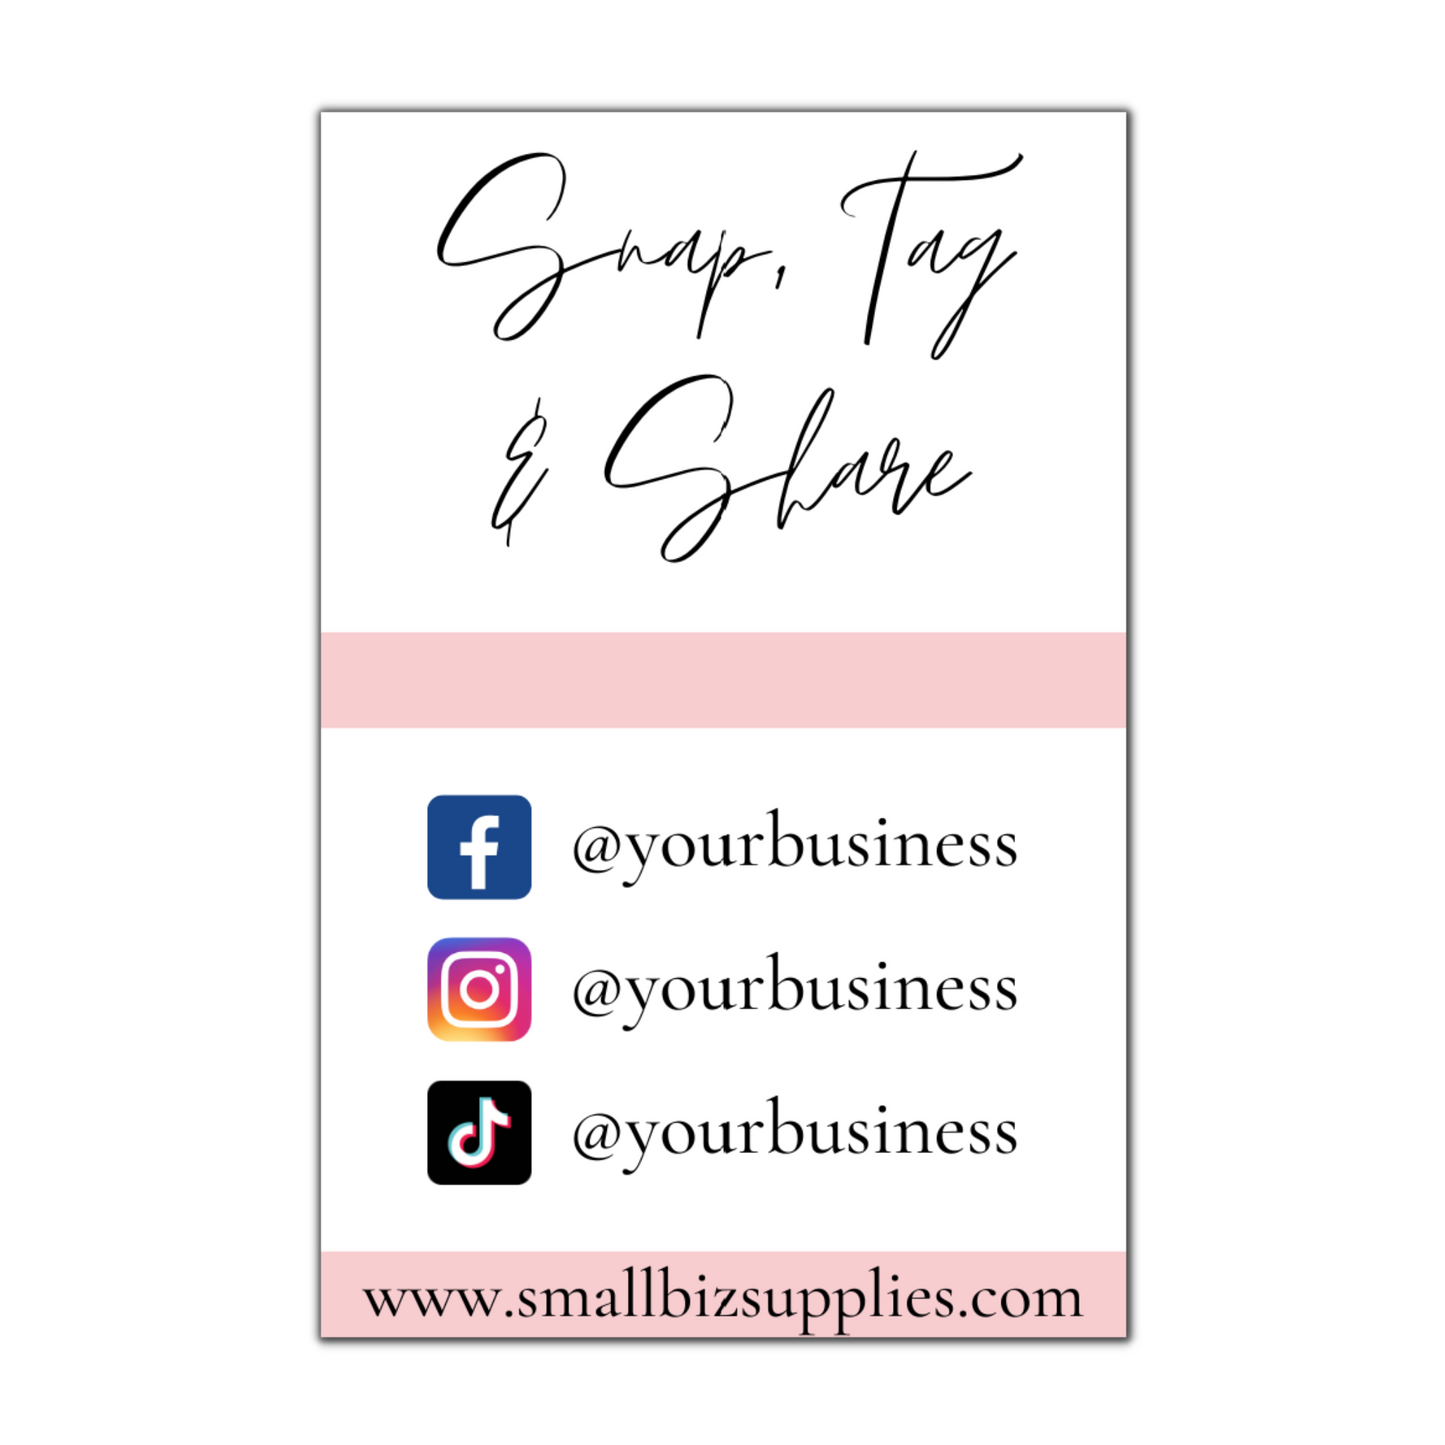 Snap, Tag & Share Cards